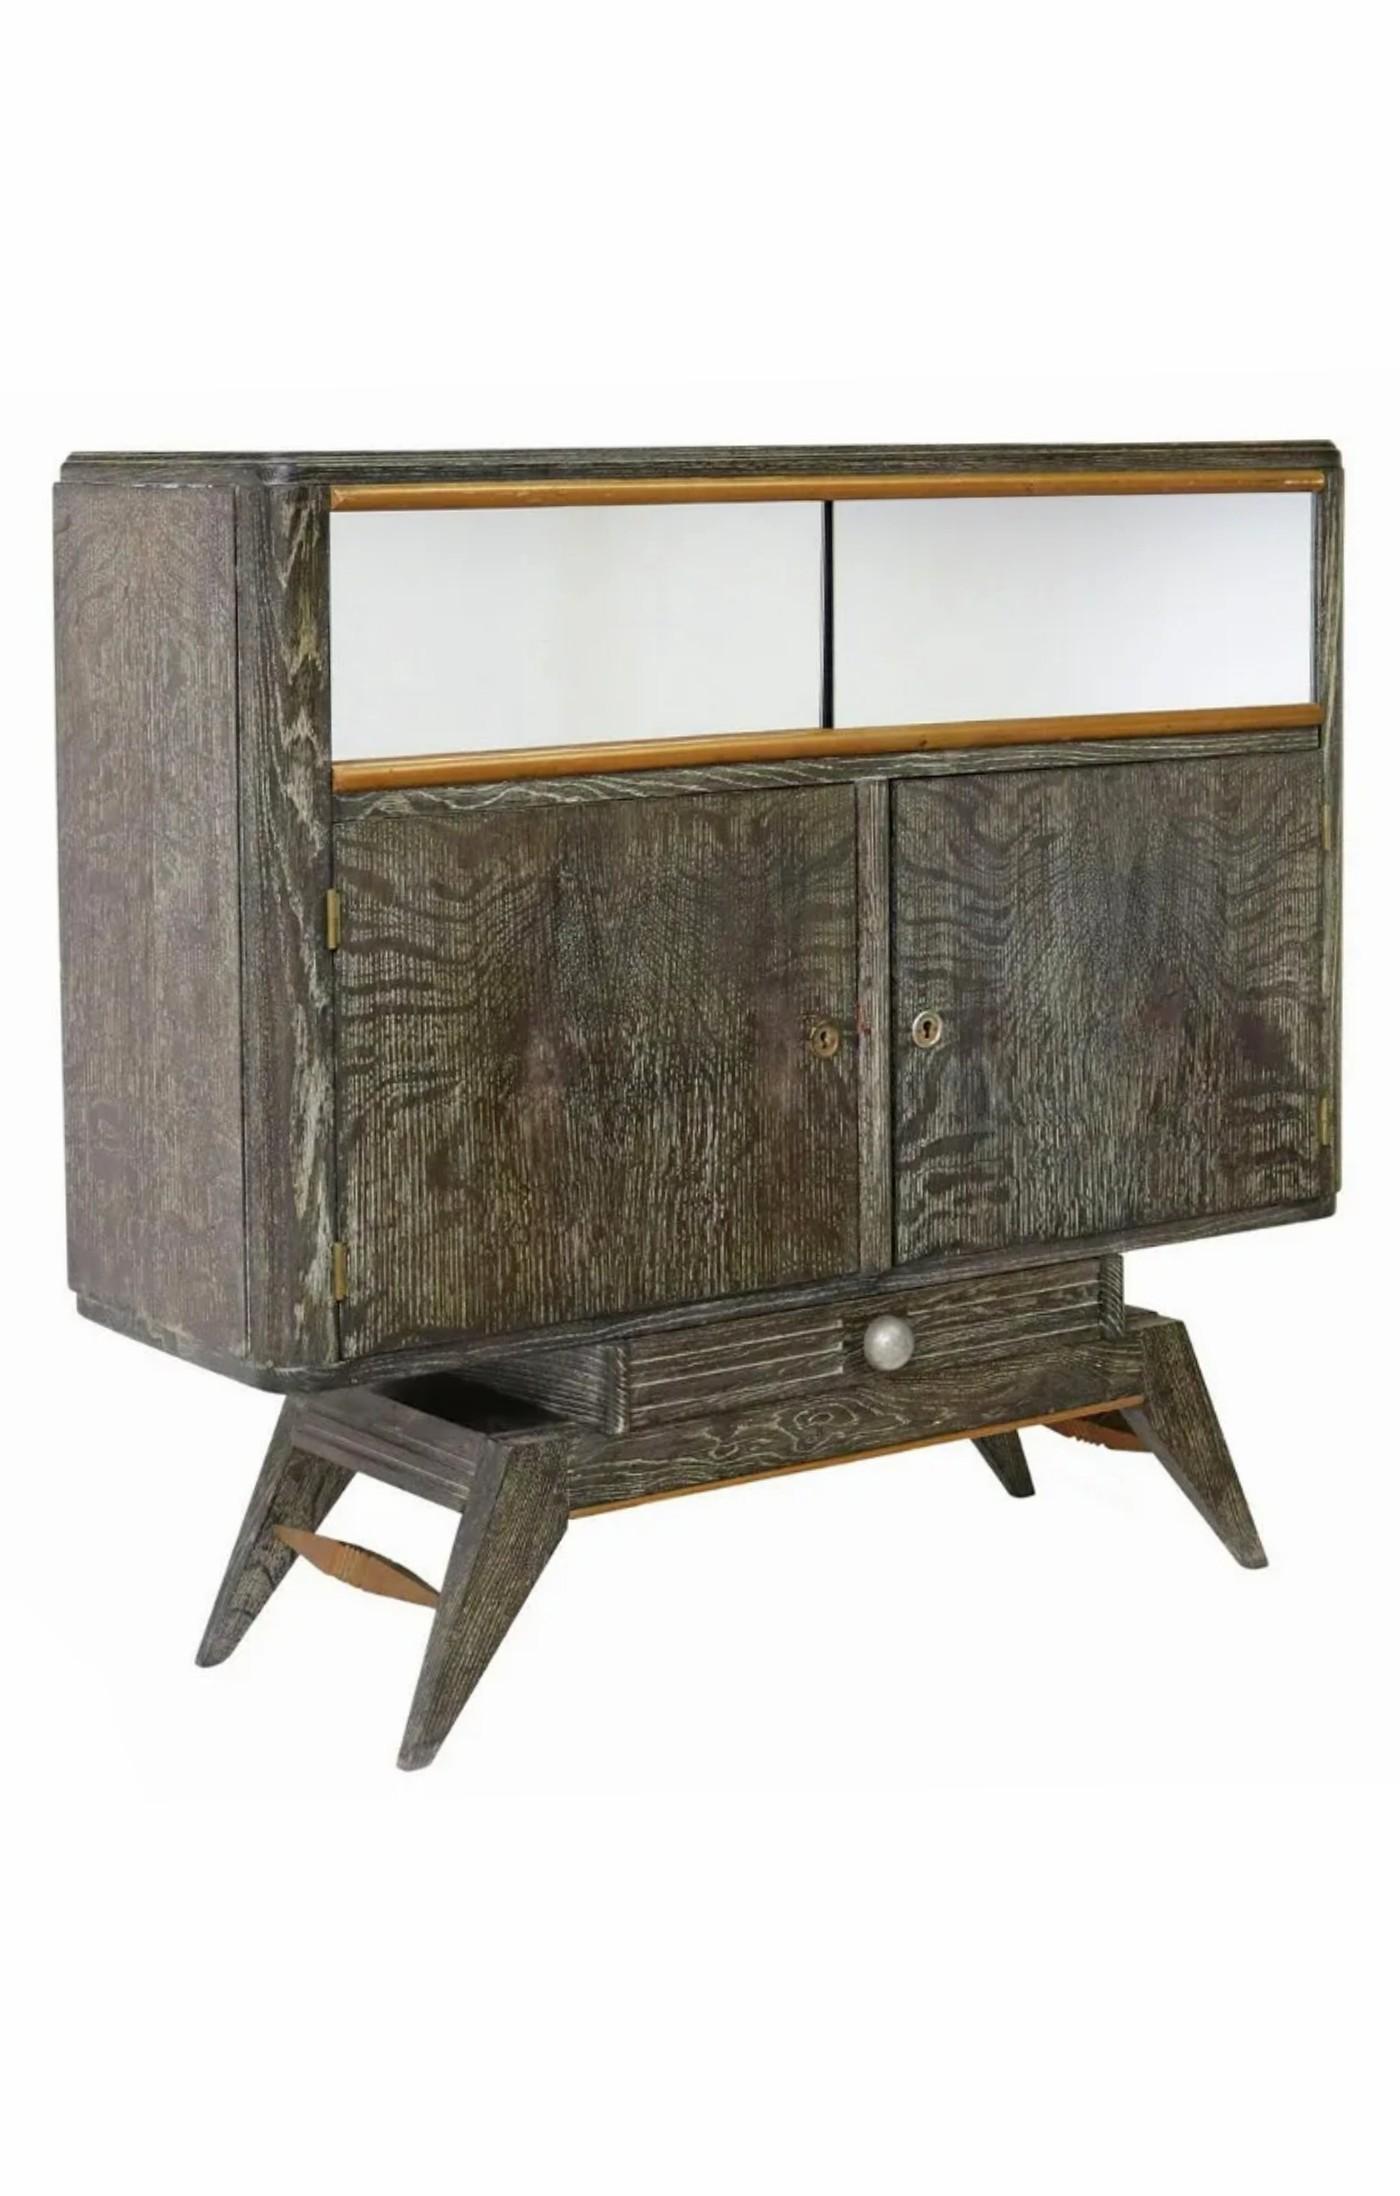 A fabulous French Art Deco period bar cabinet in highly sought-after cerused oak.

Hand-crafted in France in the early 20th century, high quality, most likely Parisian work, having sliding mirrored doors, over dual shelved cabinets, single lower